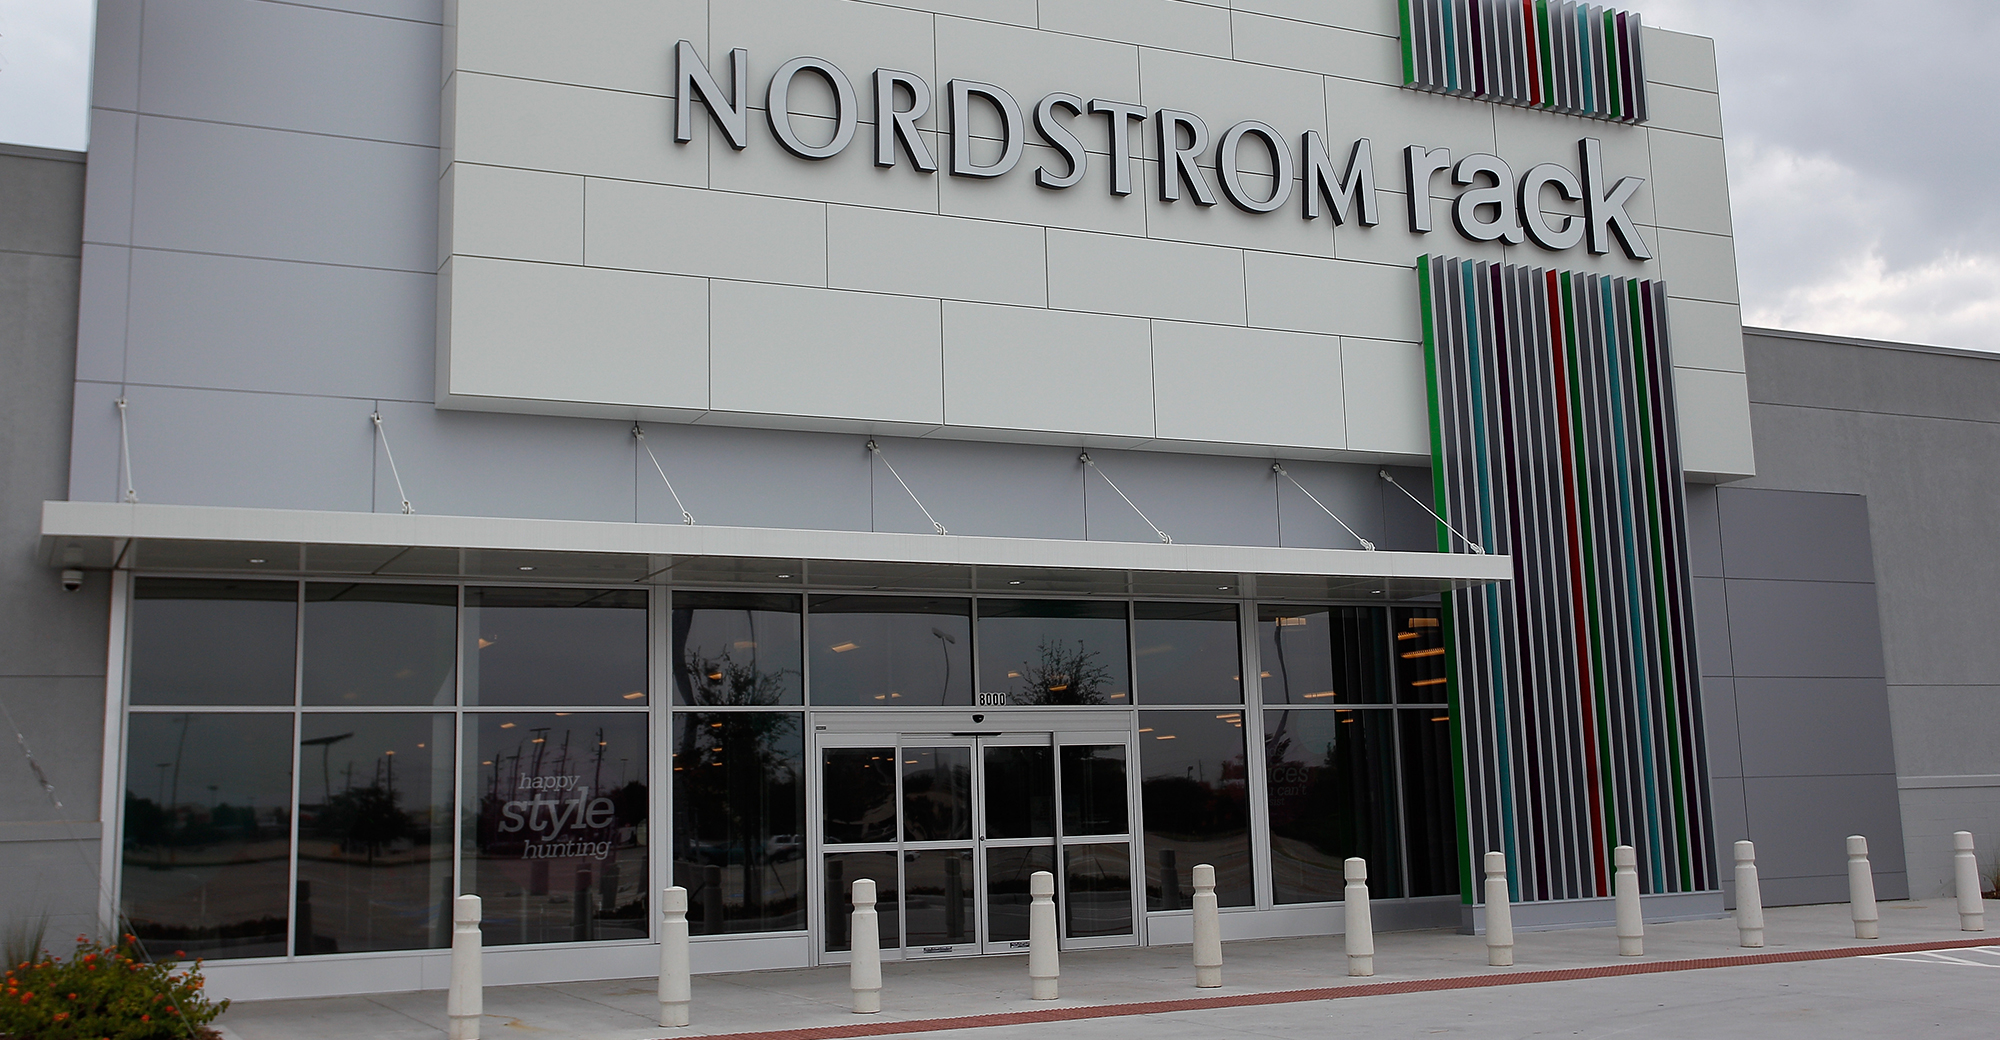 Nordstrom Rack to Open 9 New Locations Across U.S. Amid Brand